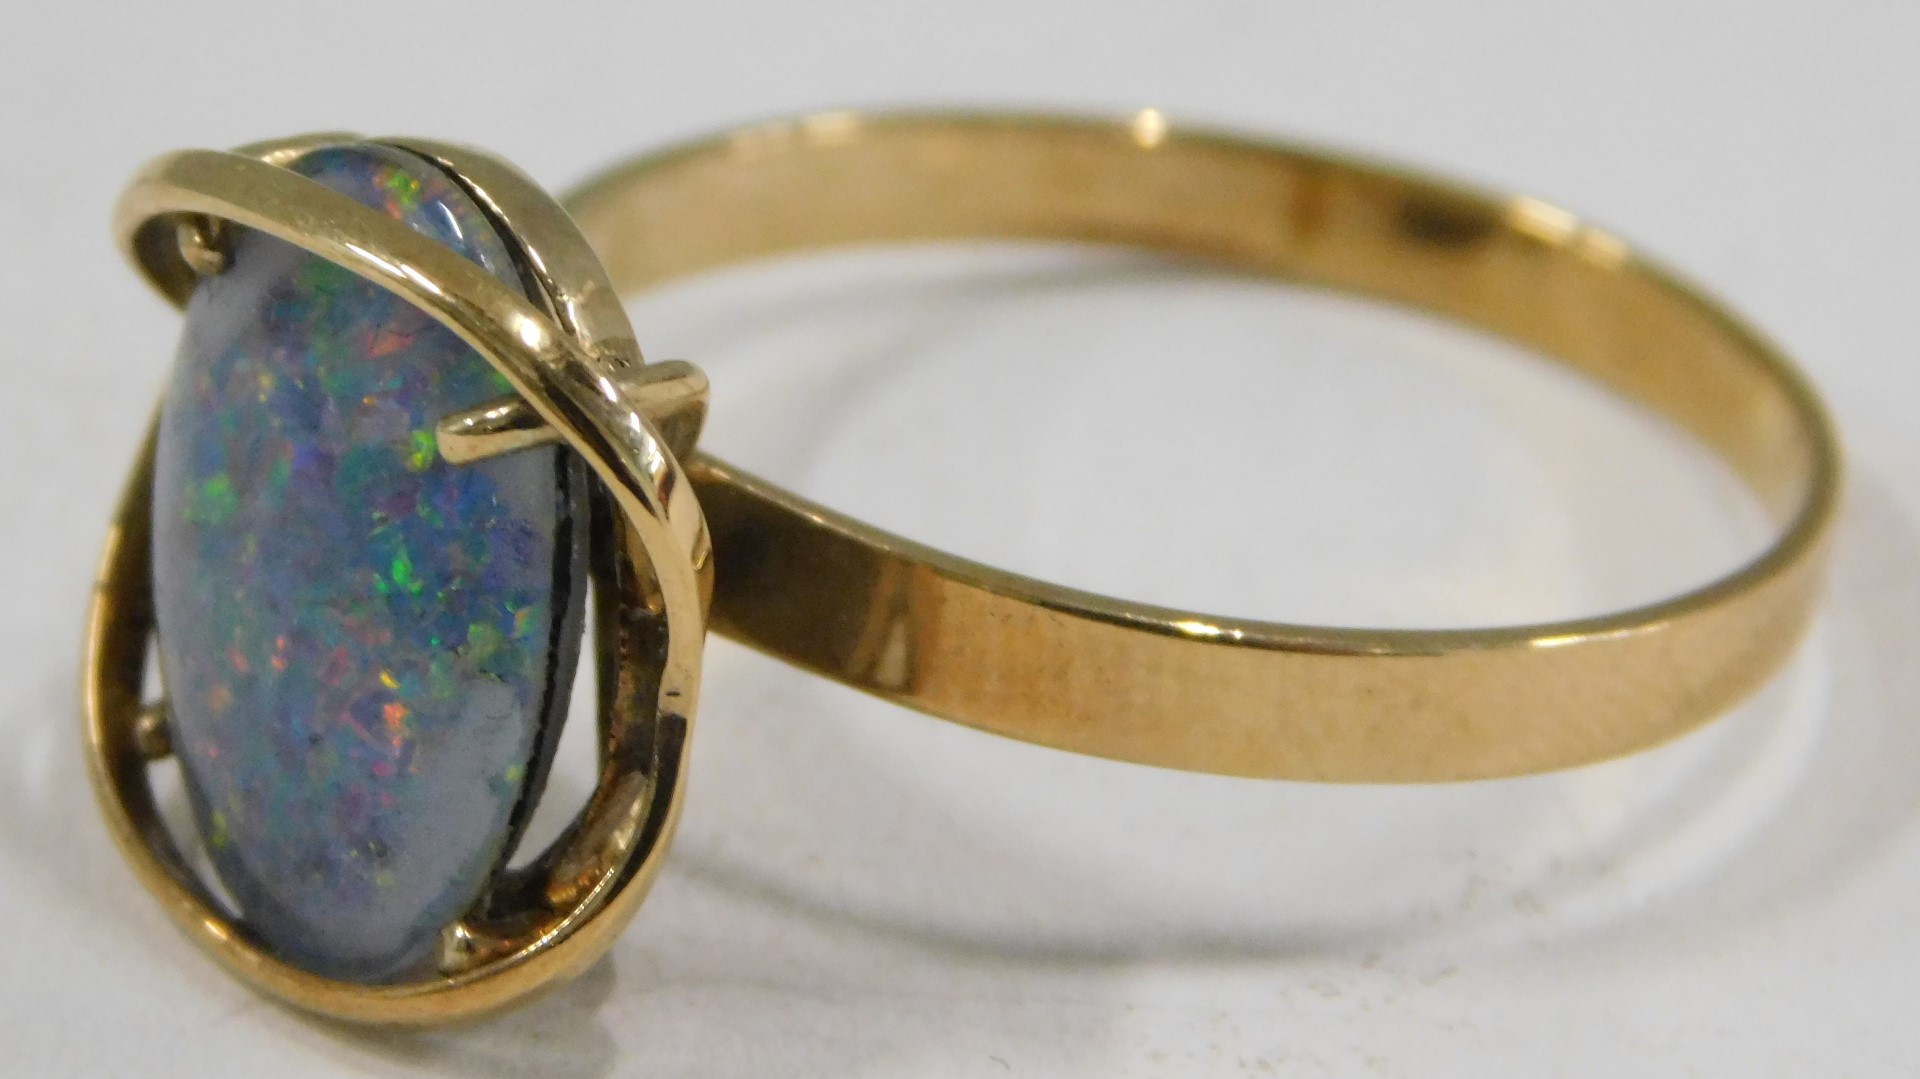 An imitation opal dress ring, the imitation opal doublet, with dark blue flare, in a raised yellow m - Image 2 of 2